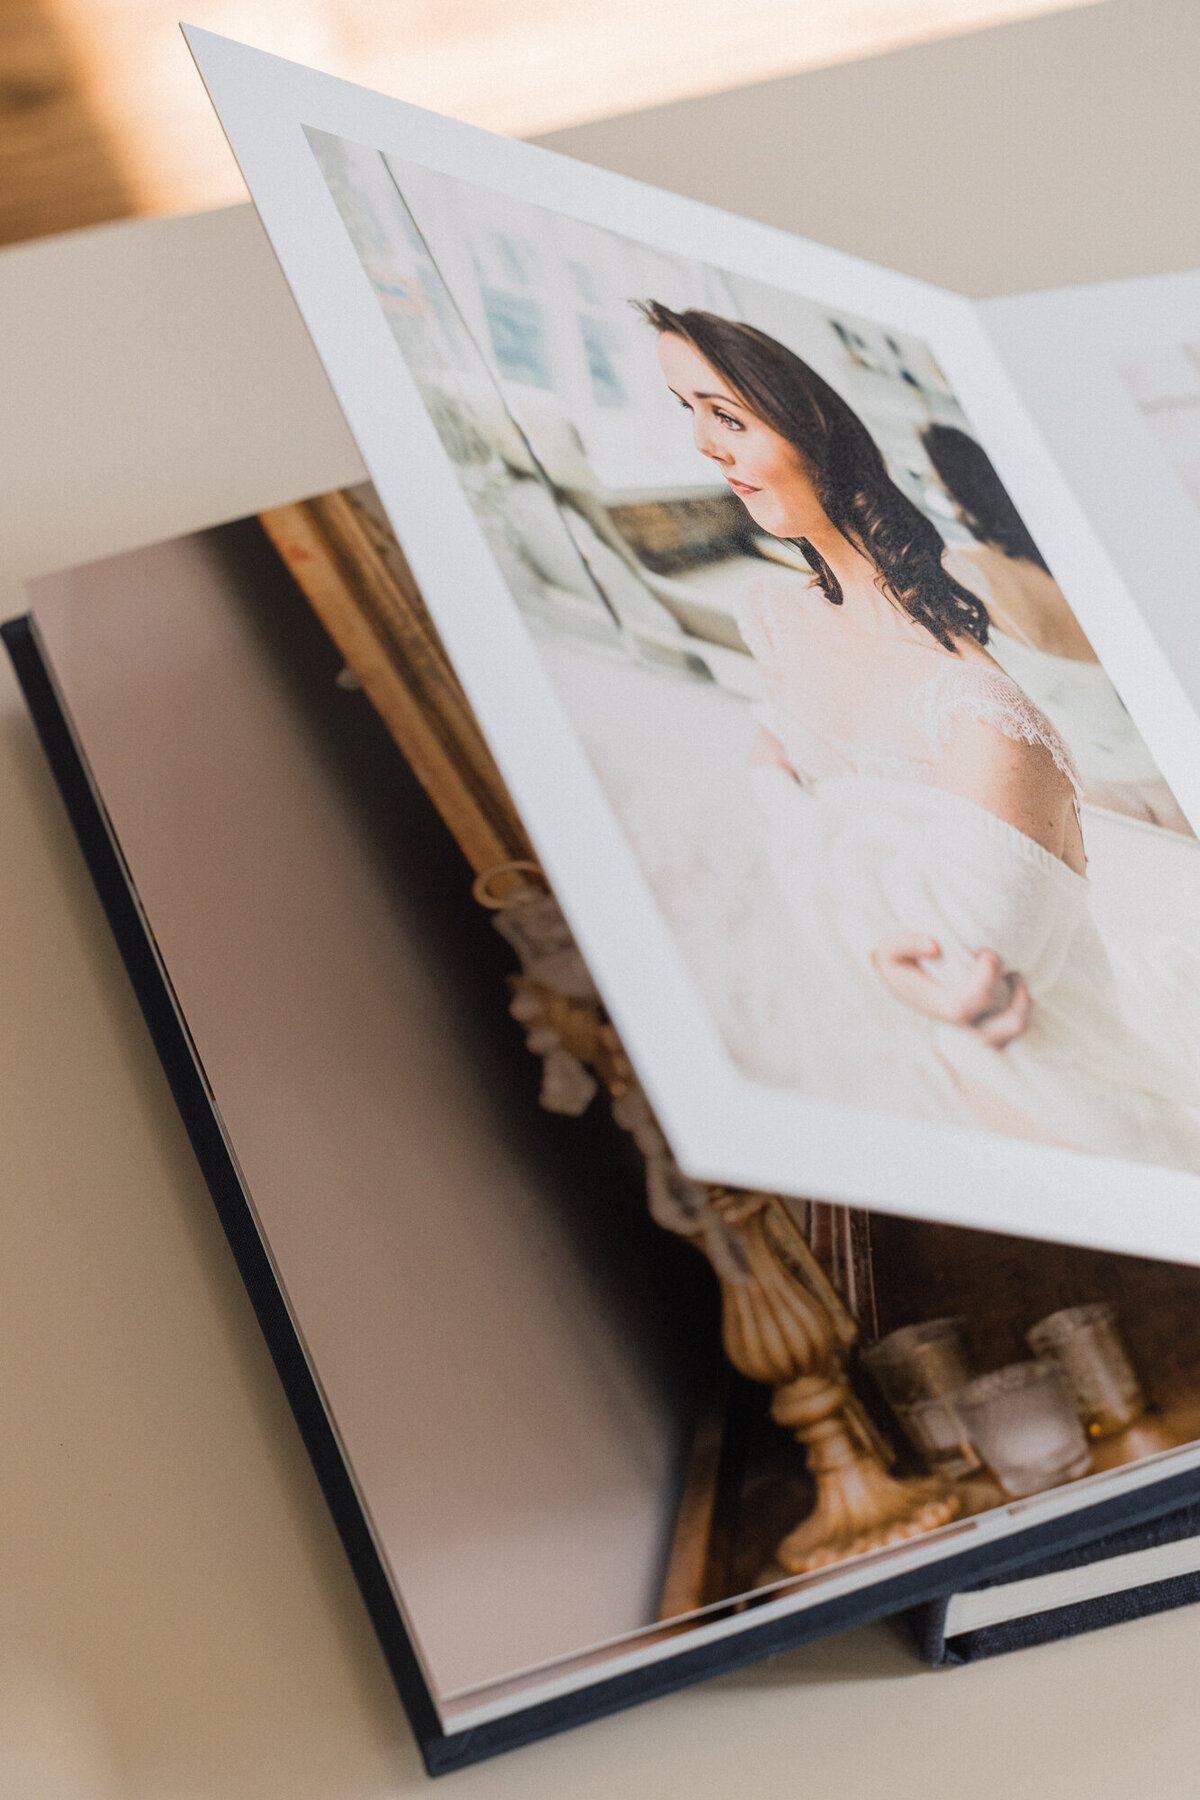 A bride gifts a stunning boudoir album to her soon-to-be husband for their wedding day